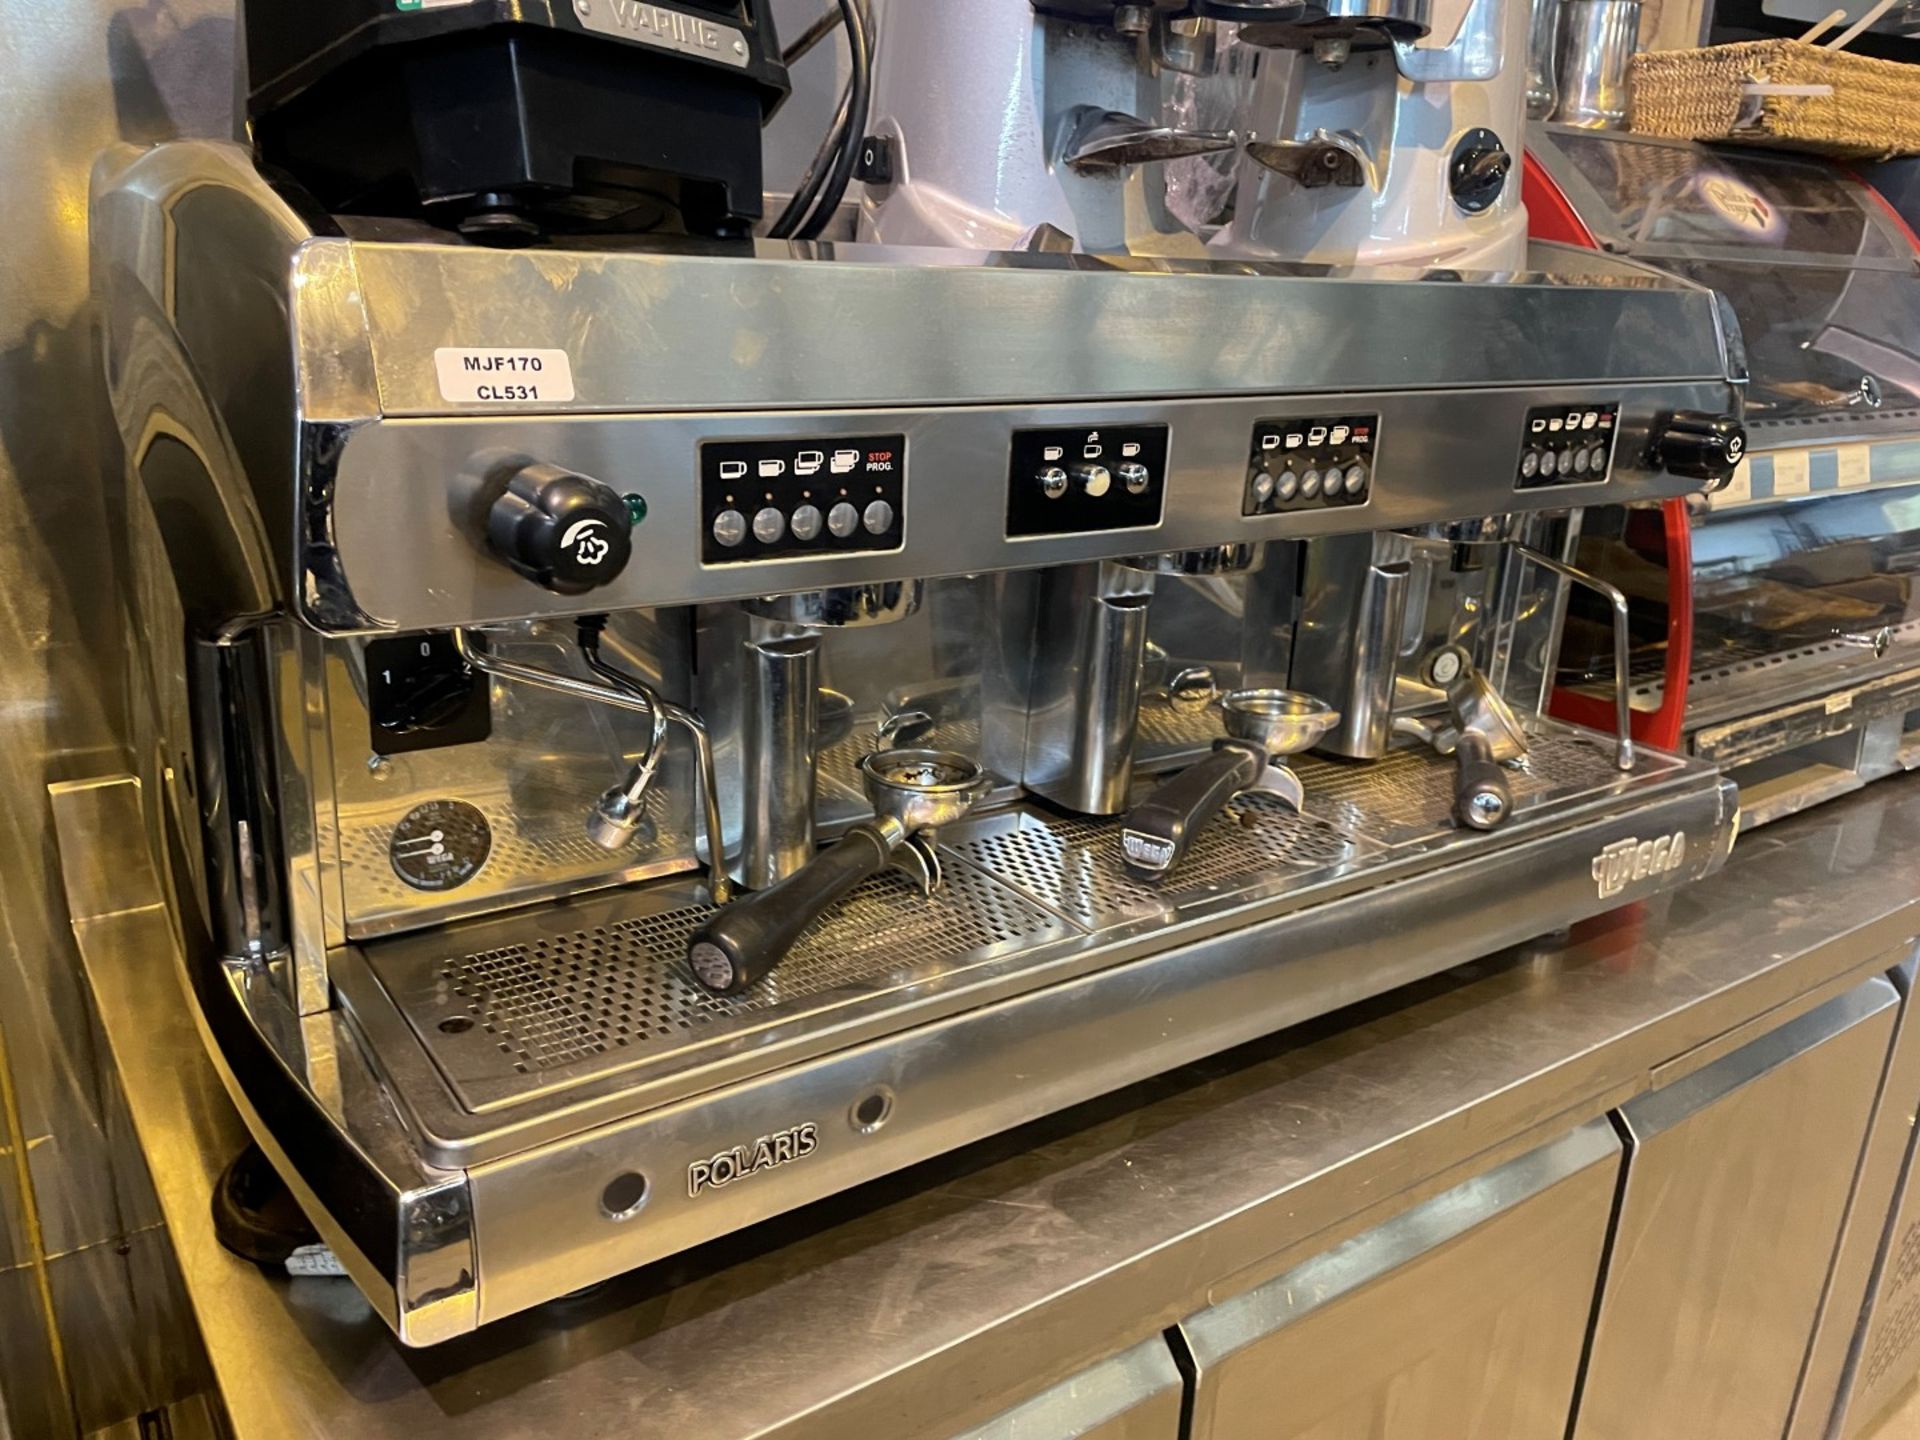 1 x Polaris Wega 3 Group Commercial Espresso Coffee Machine - Stainless Steel Finish - Approx 100cms - Image 5 of 7